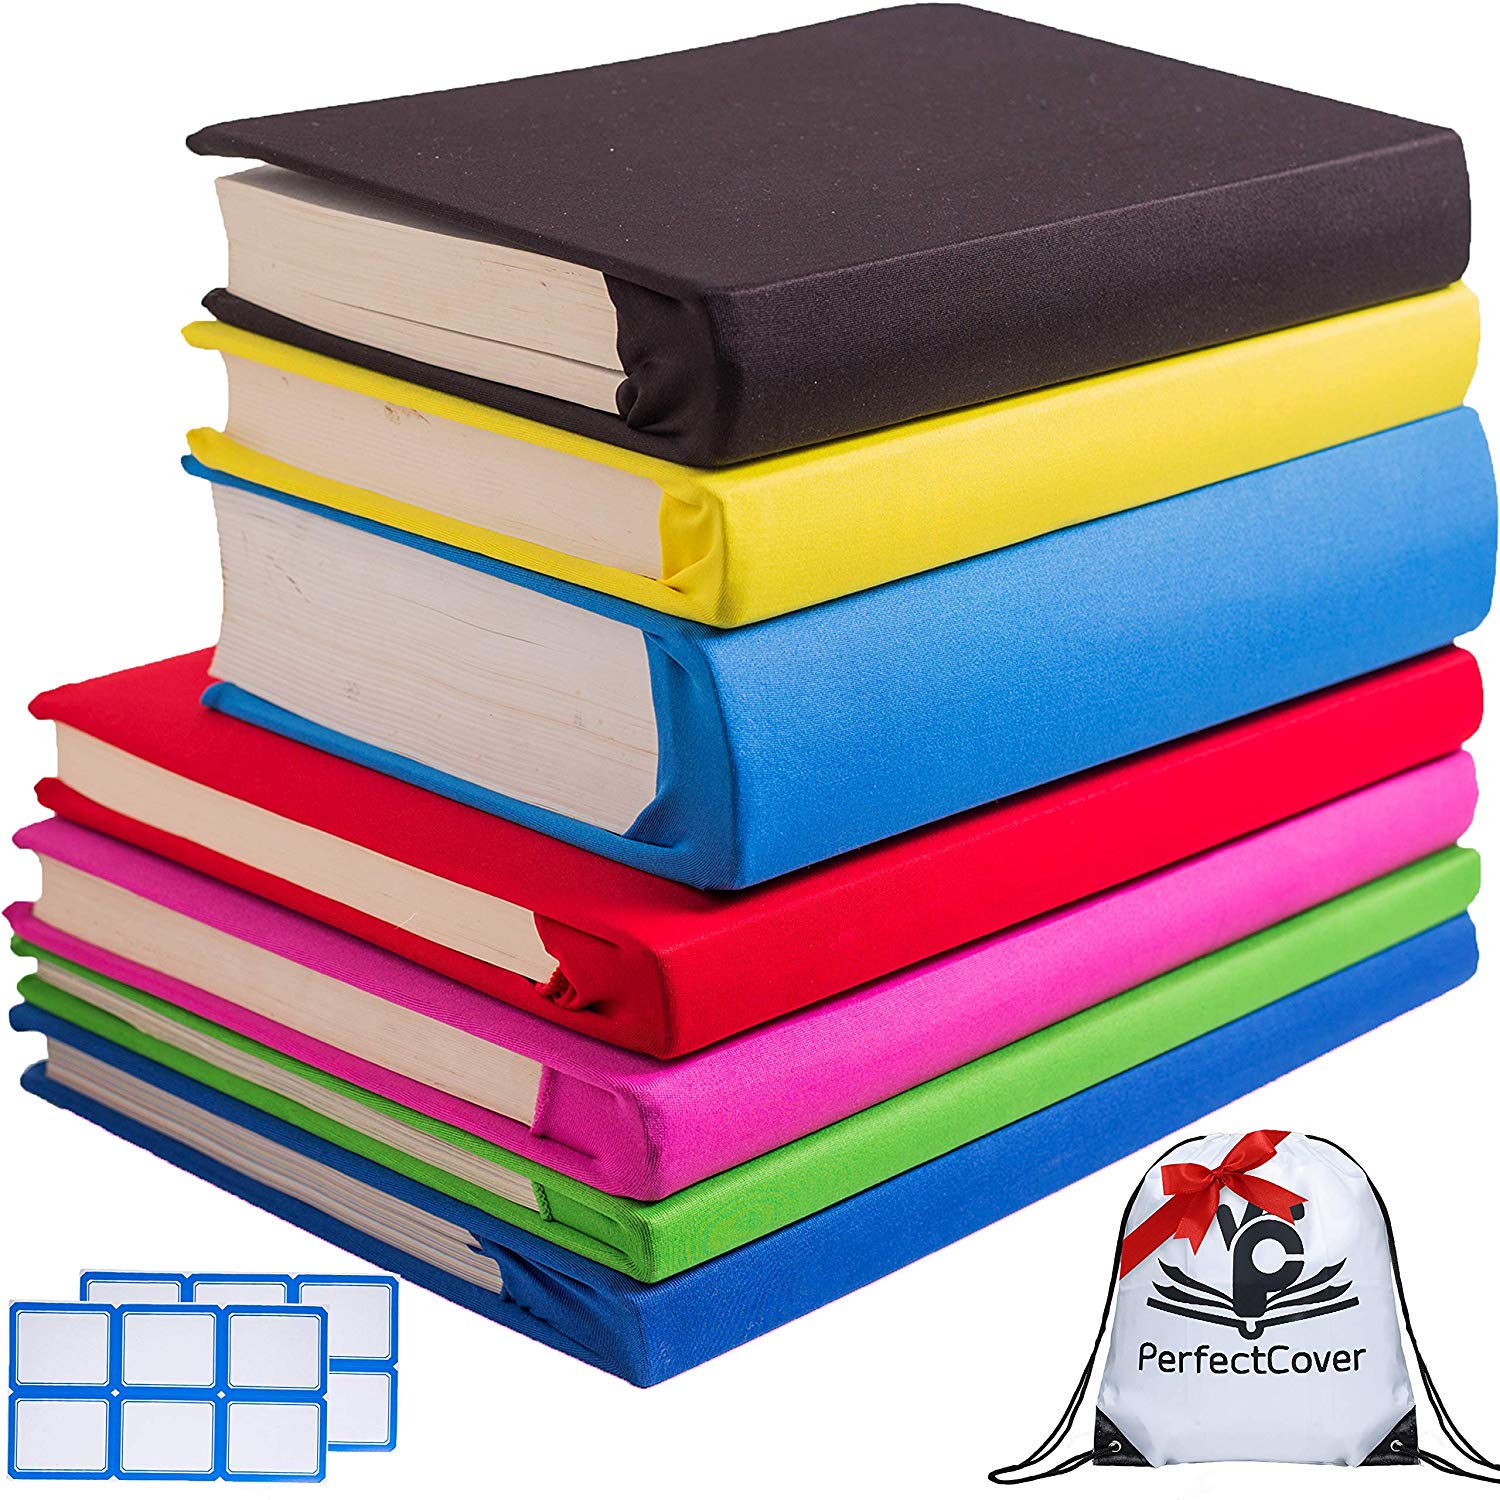 Stretchable Jumbo Book Covers Fits Hardcover Textbooks Up to 9.5 X 14,7 Pack,Durable Book Protector,Washable and Reusable,Office Supplies,Extras Index Tab 100pcs 